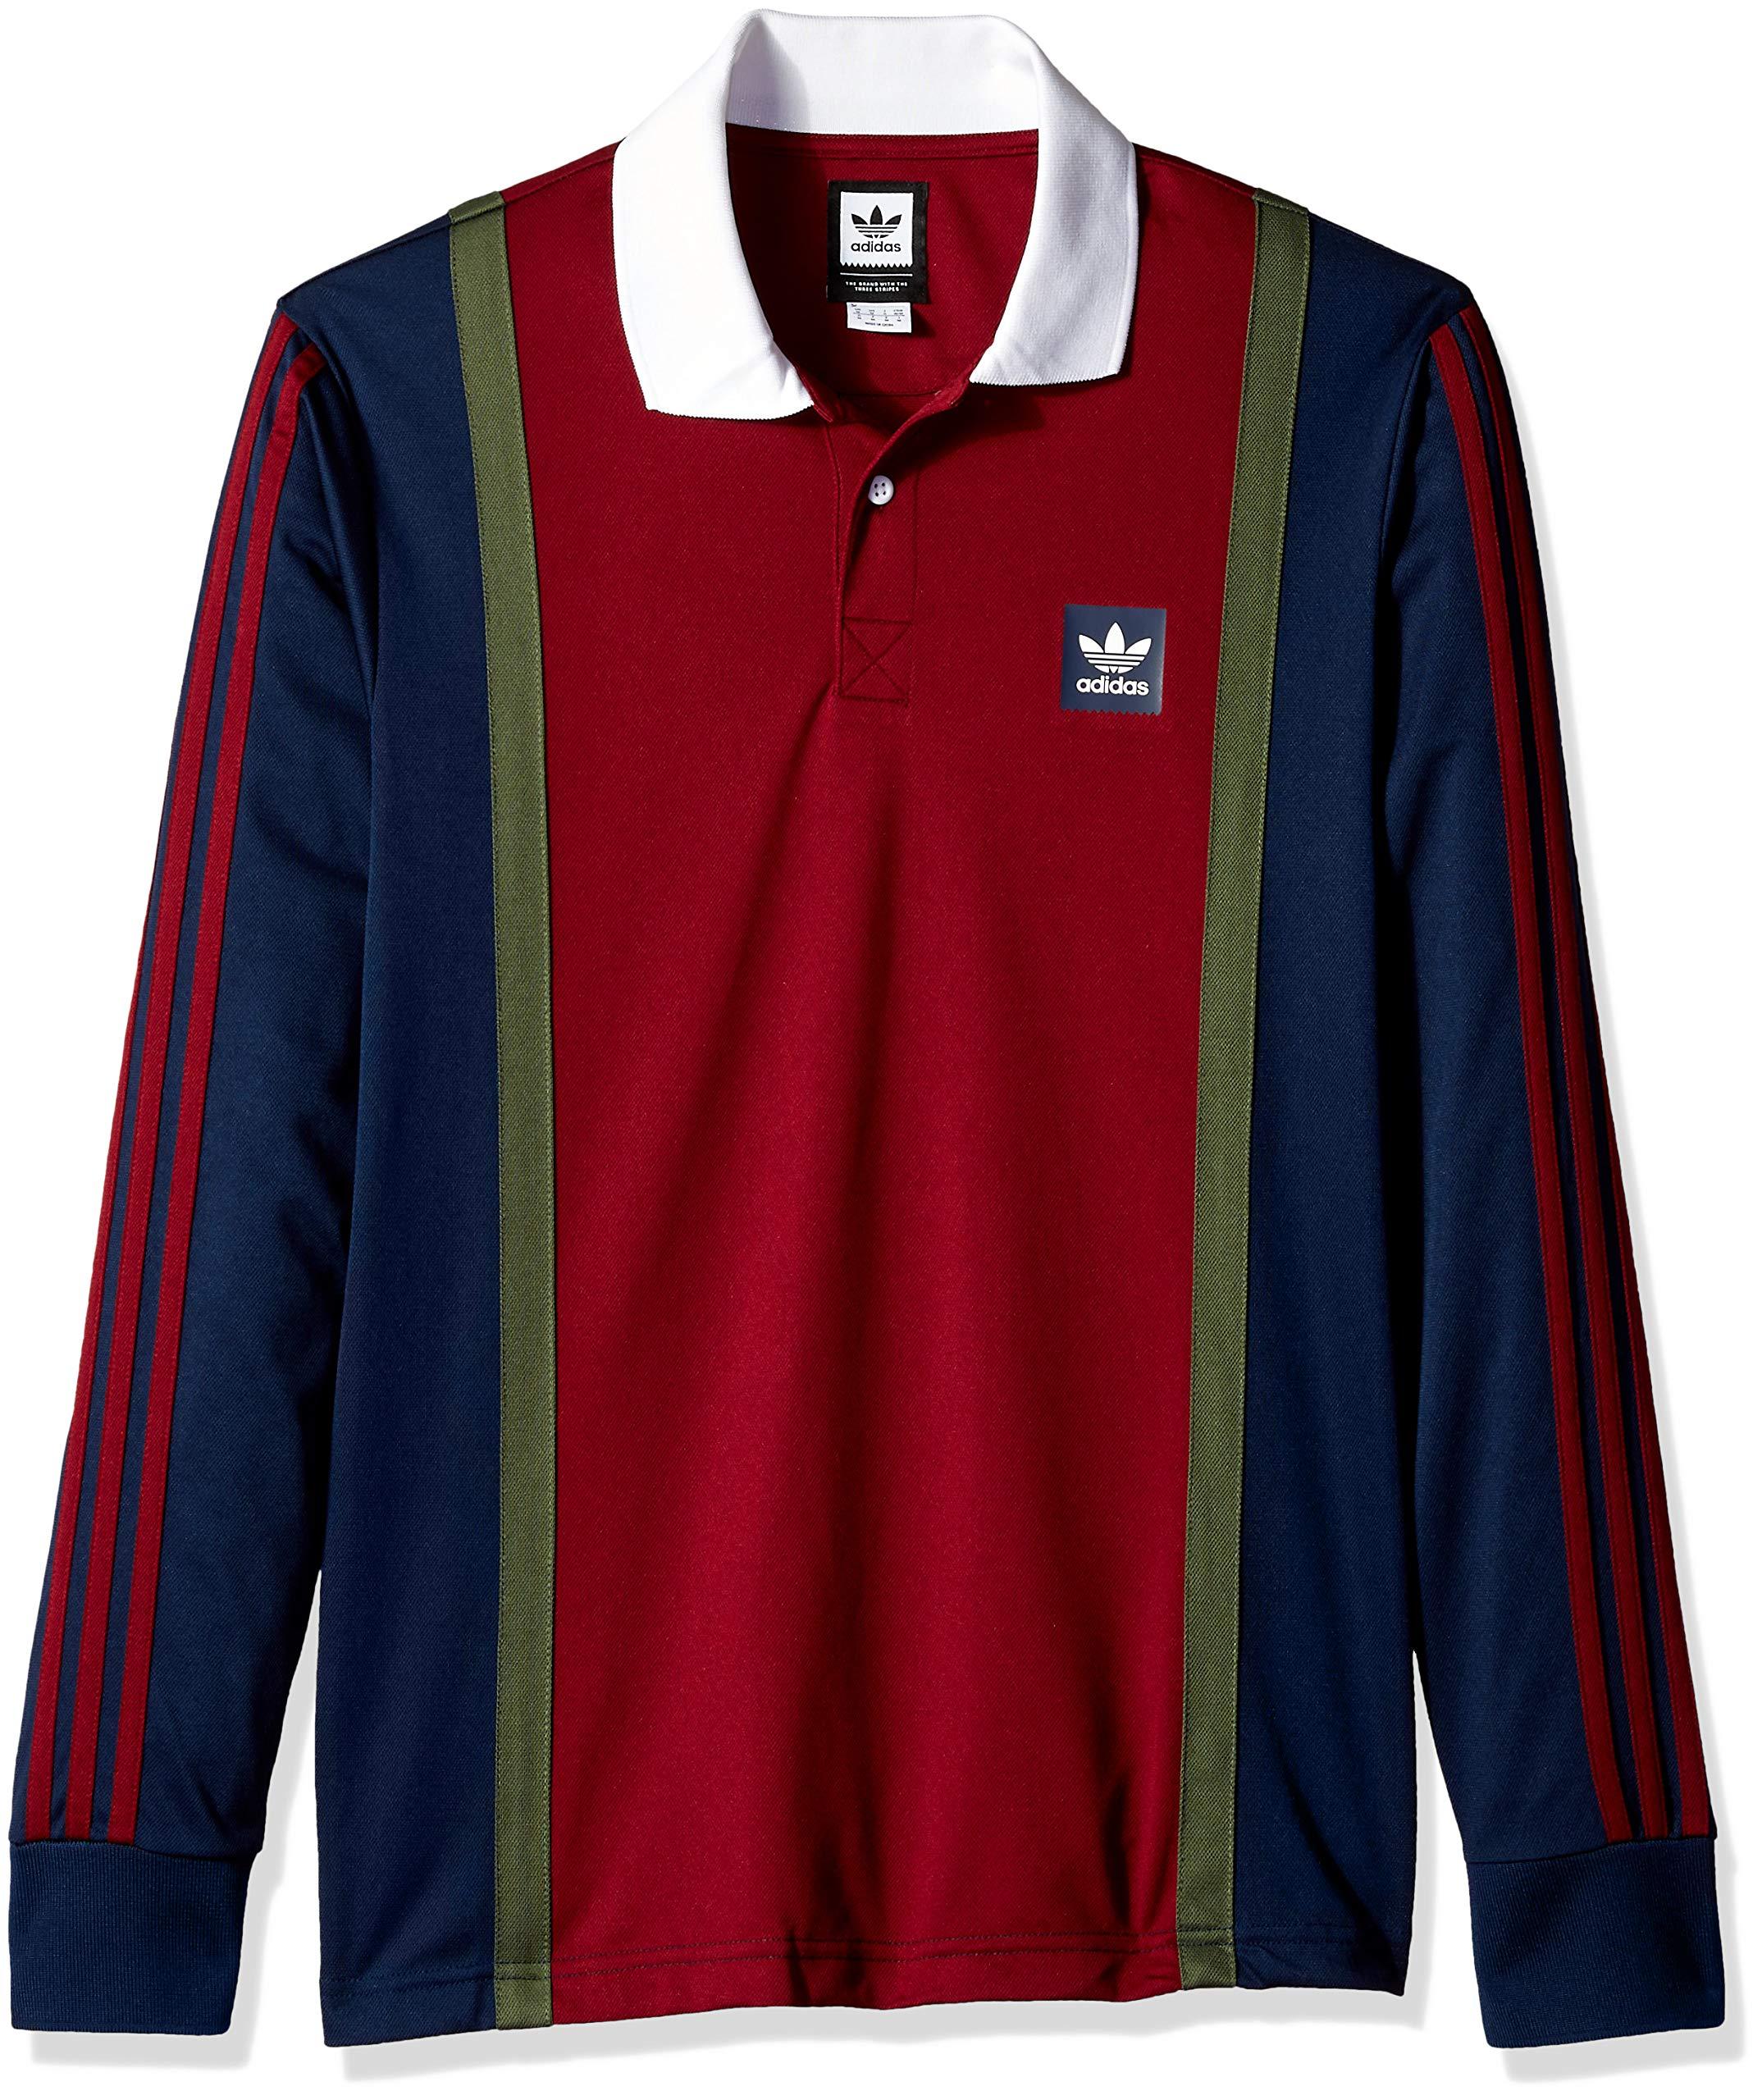 adidas Originals Skateboarding Rugby Jersey in Red for Men - Lyst